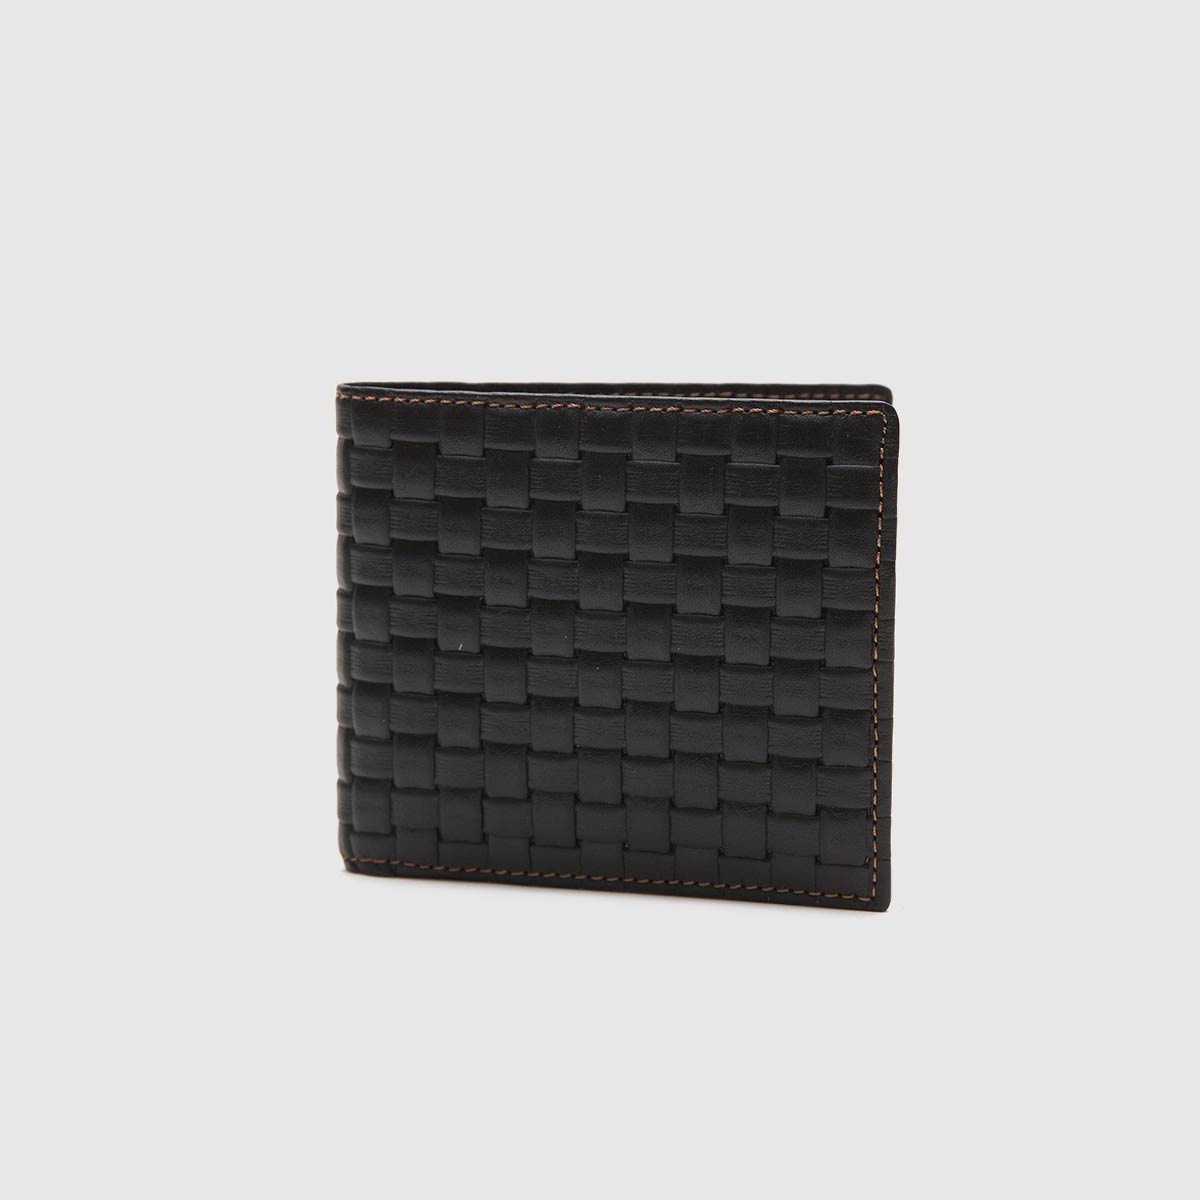 Black leather wallet with woven print Davide Albertario on sale 2022 2